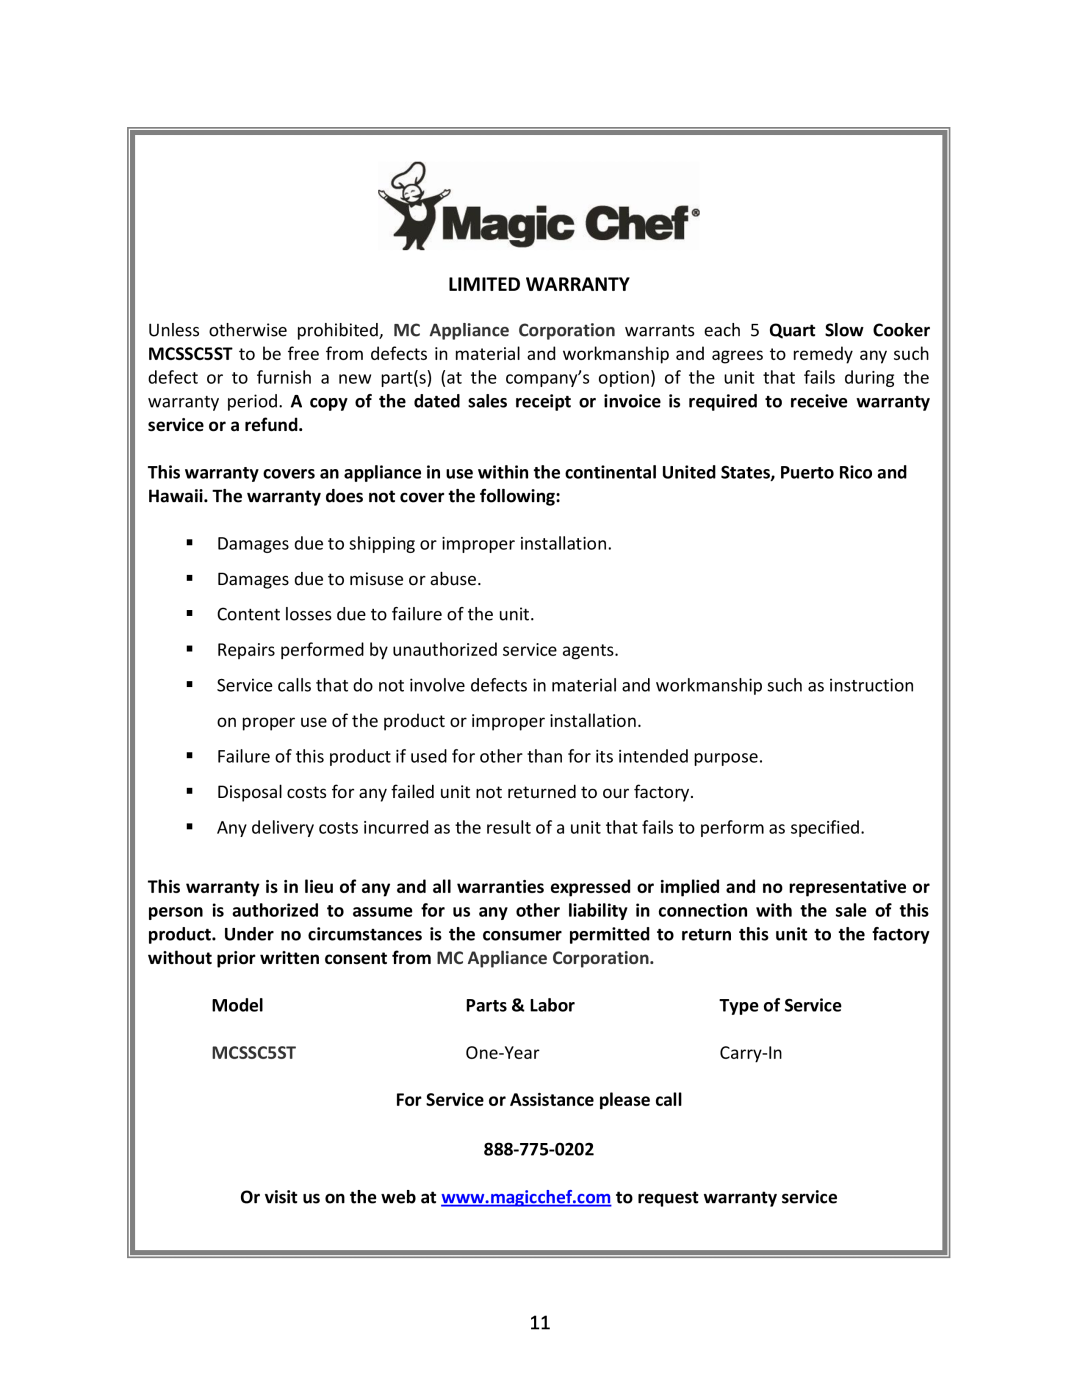 Magic Chef MCSSC5ST instruction manual Model, Parts & Labor, One-Year, Carry-In 